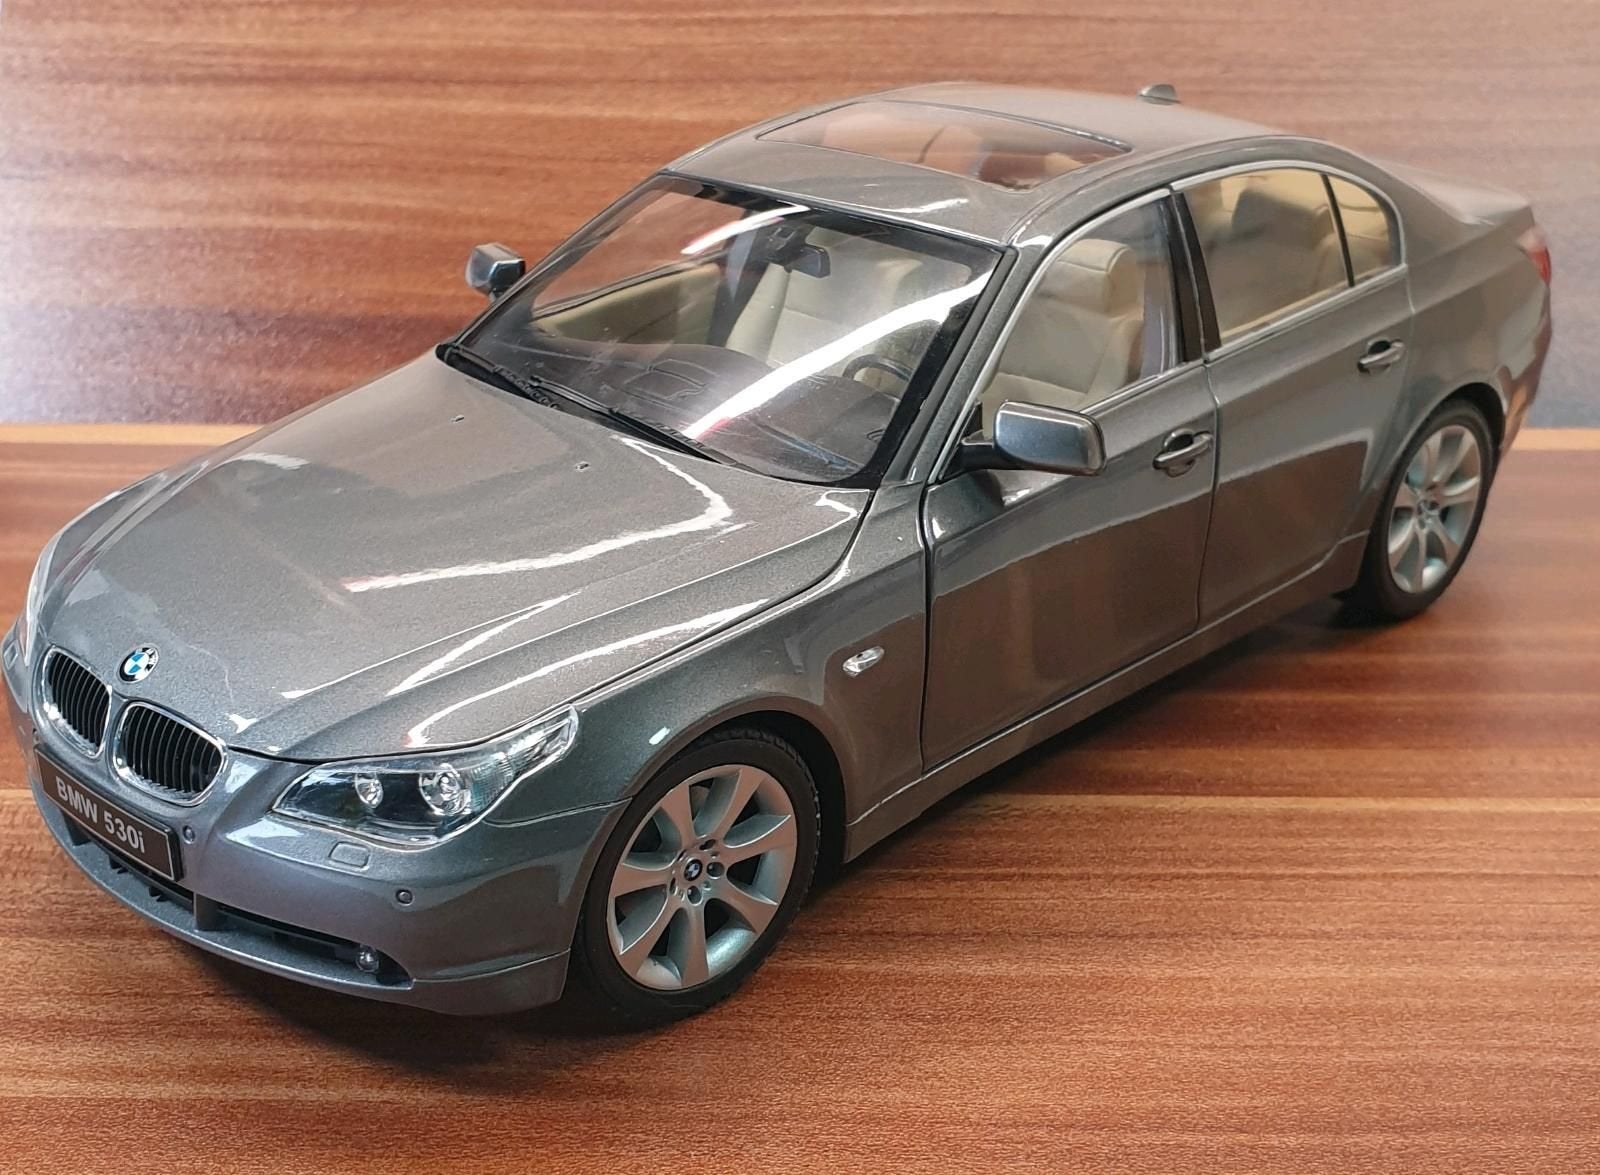 Undersized bmw e60 m5 by maisto and the irony of the Road tough lexus ls400